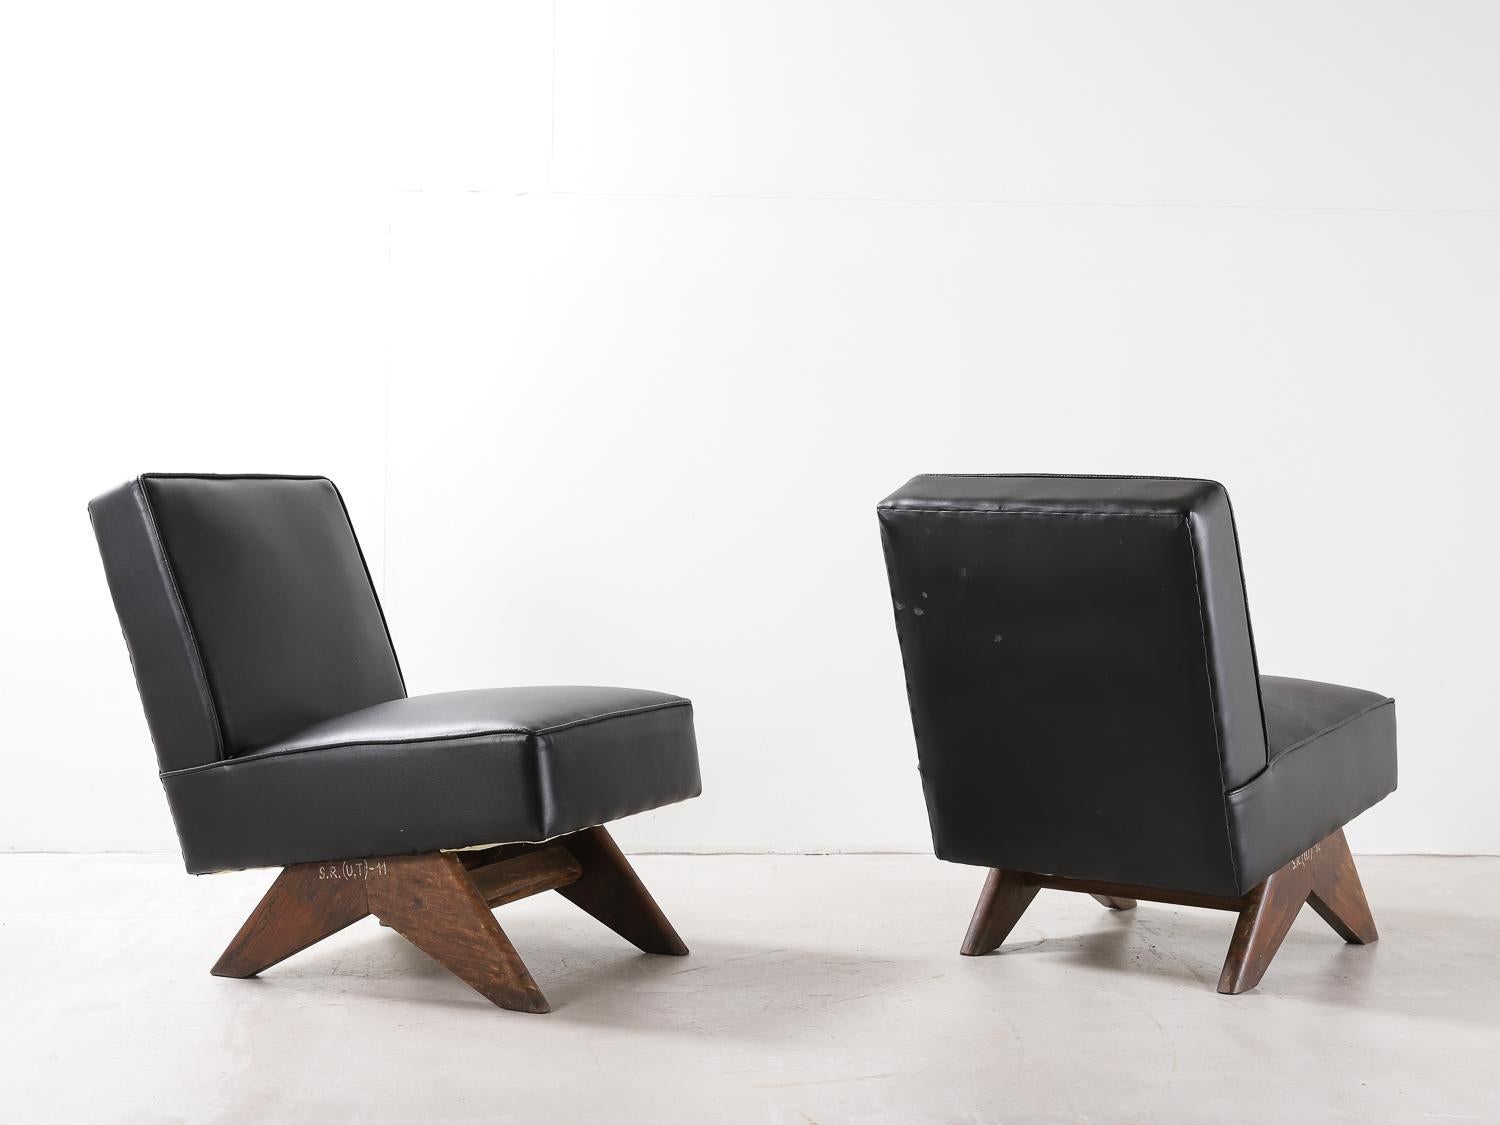 Pair Of Pierre Jeanneret ‘Fireside’ Chairs, model No. PJ-SI-36-A In Good Condition For Sale In London, Charterhouse Square